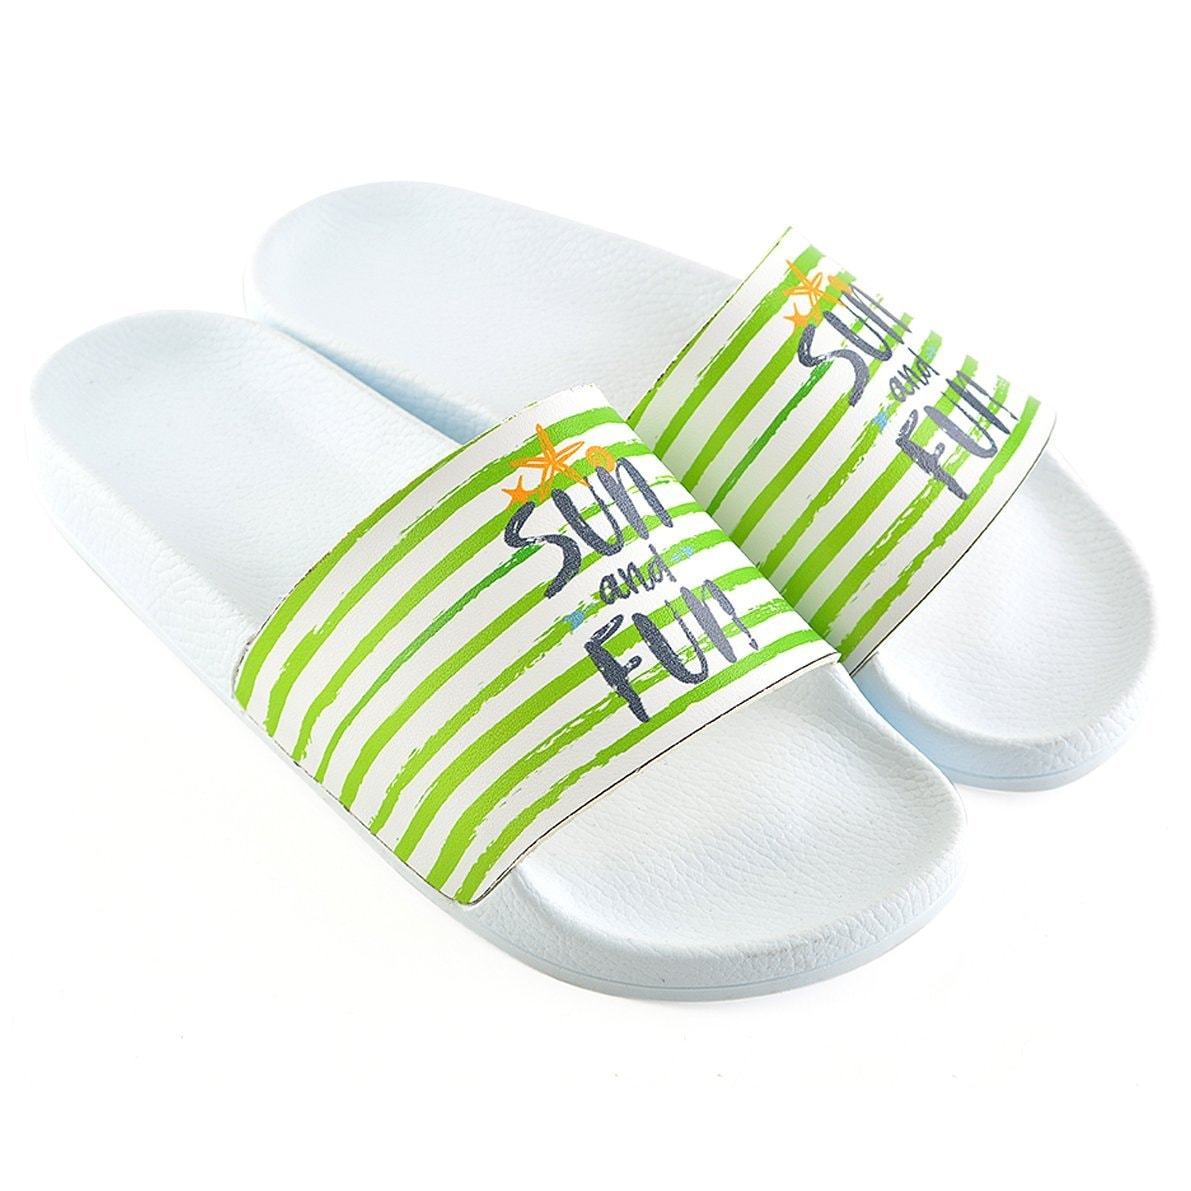 Green and White Striped, Sun and Fun Written Patterned Sandal - CAP108